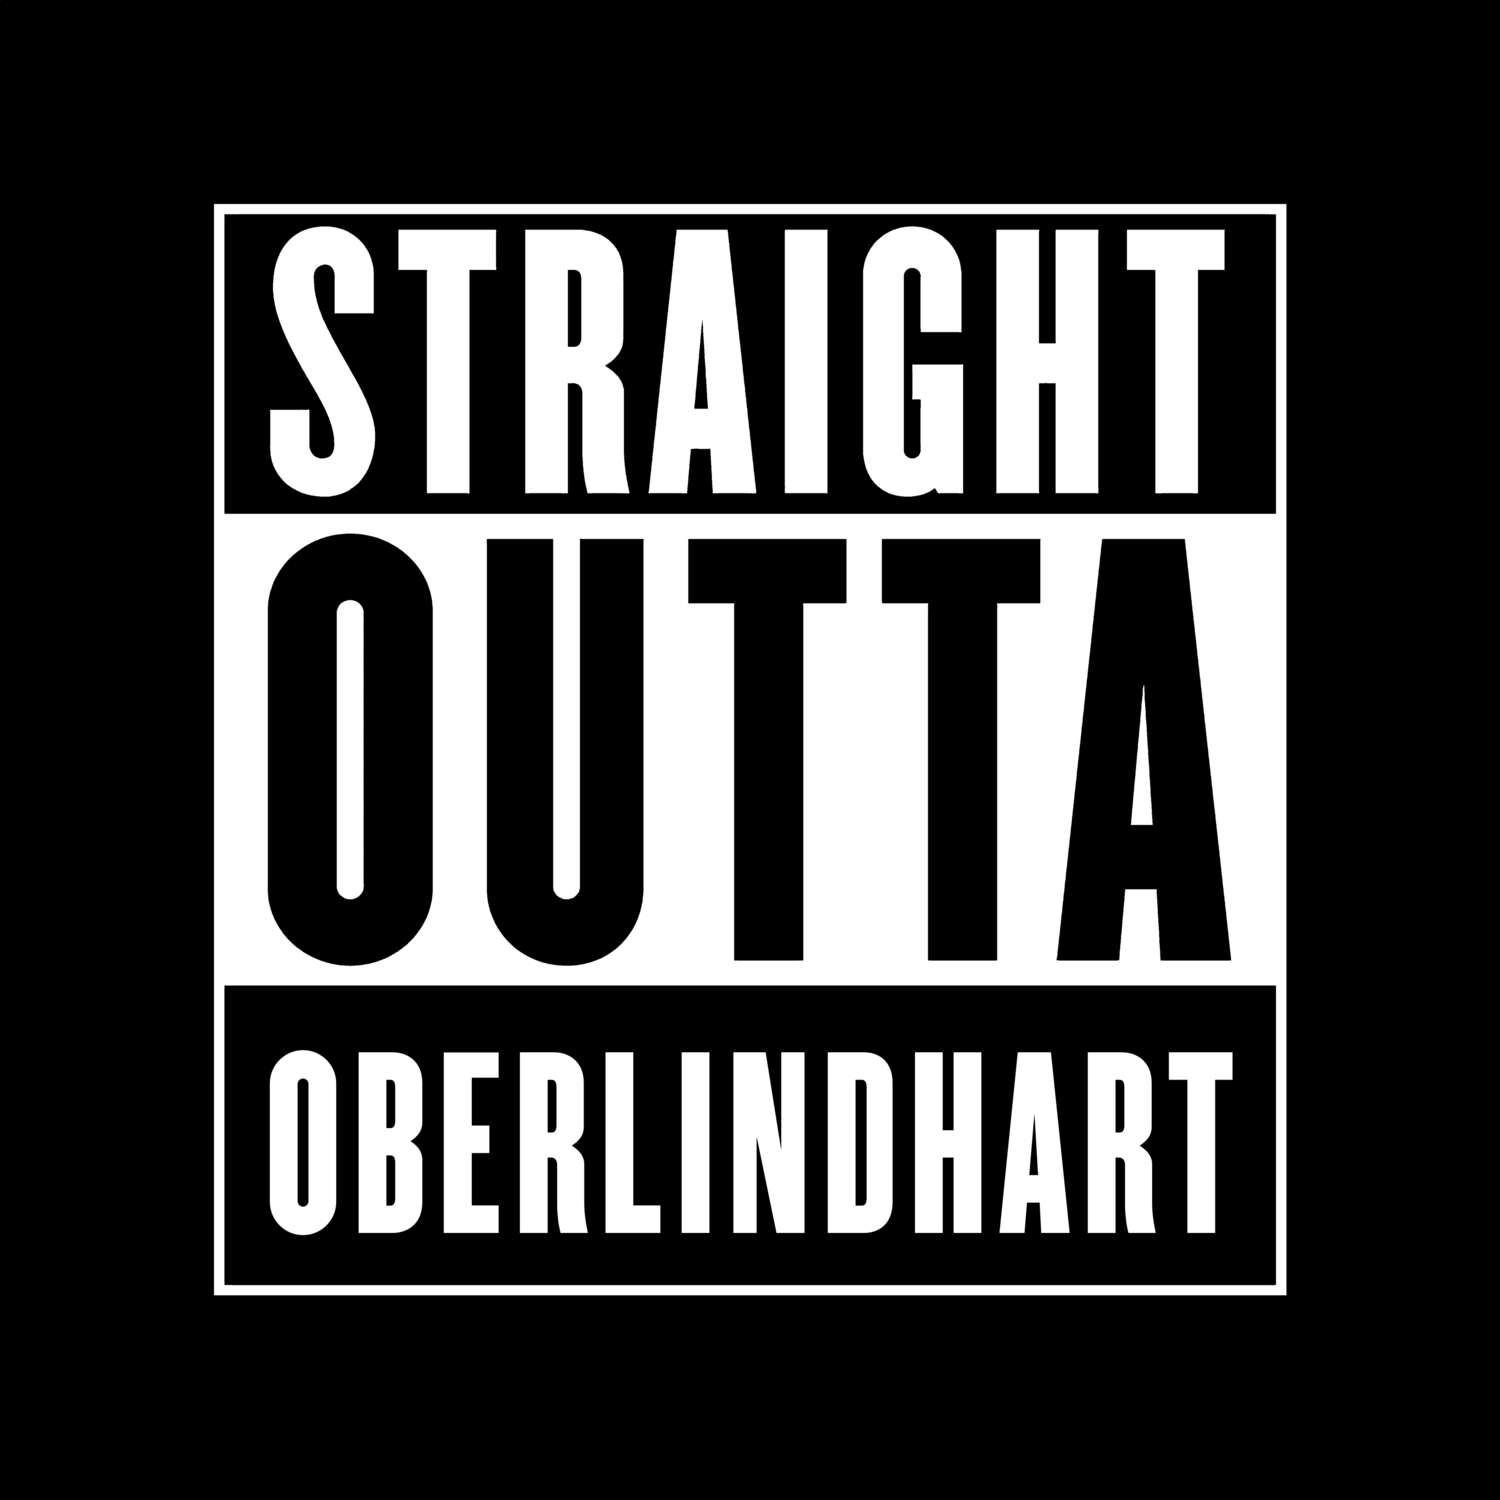 Oberlindhart T-Shirt »Straight Outta«